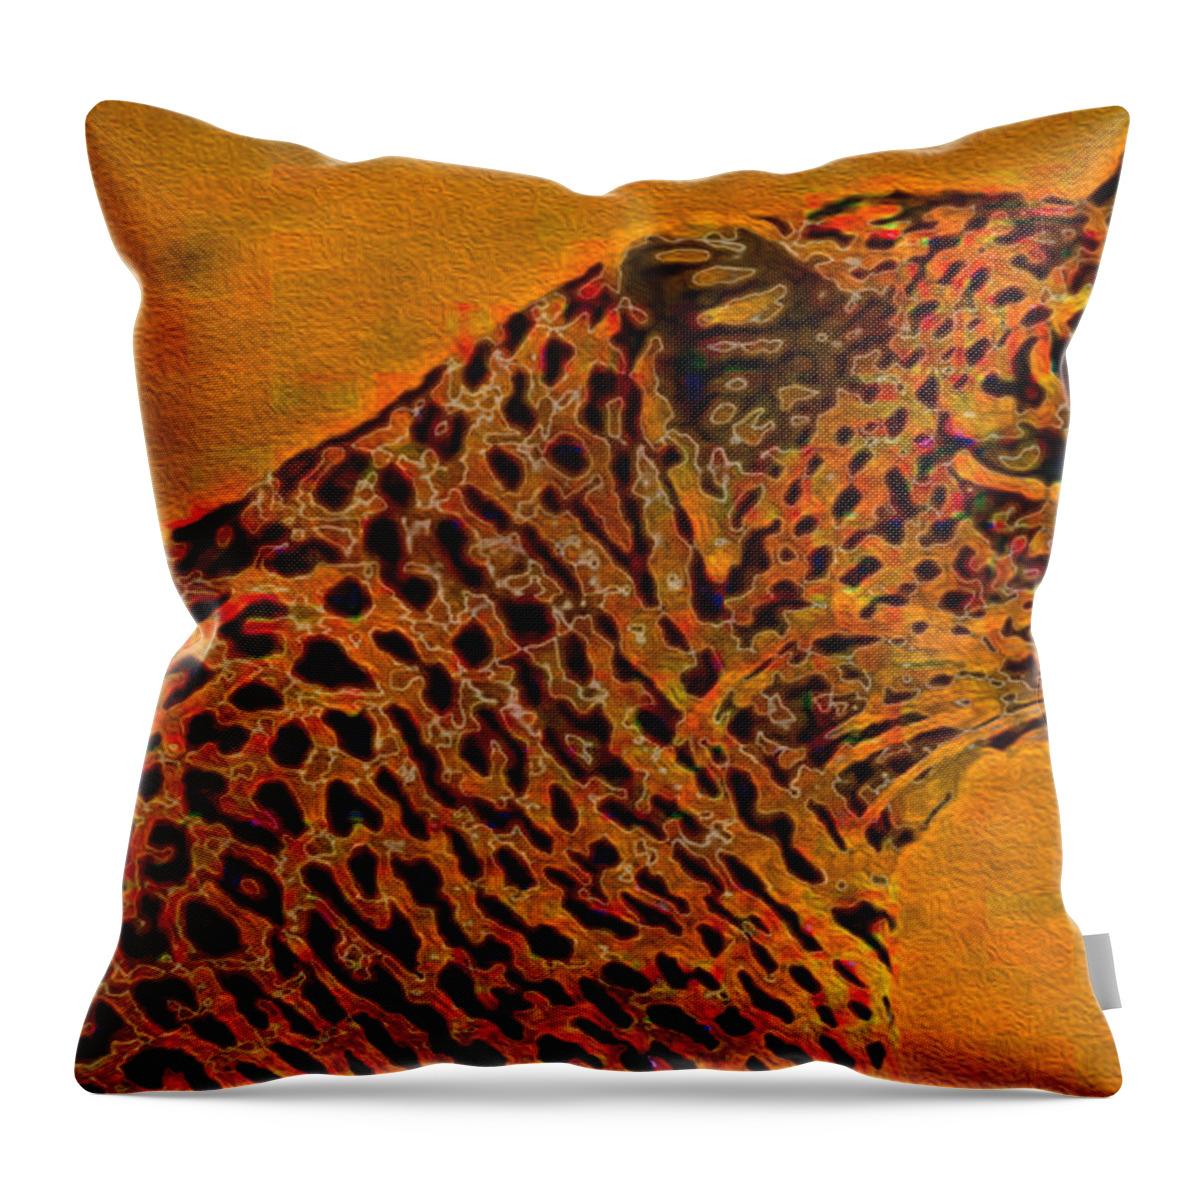 Leopard Throw Pillow featuring the digital art Essence of Leopard by Stephanie Grant